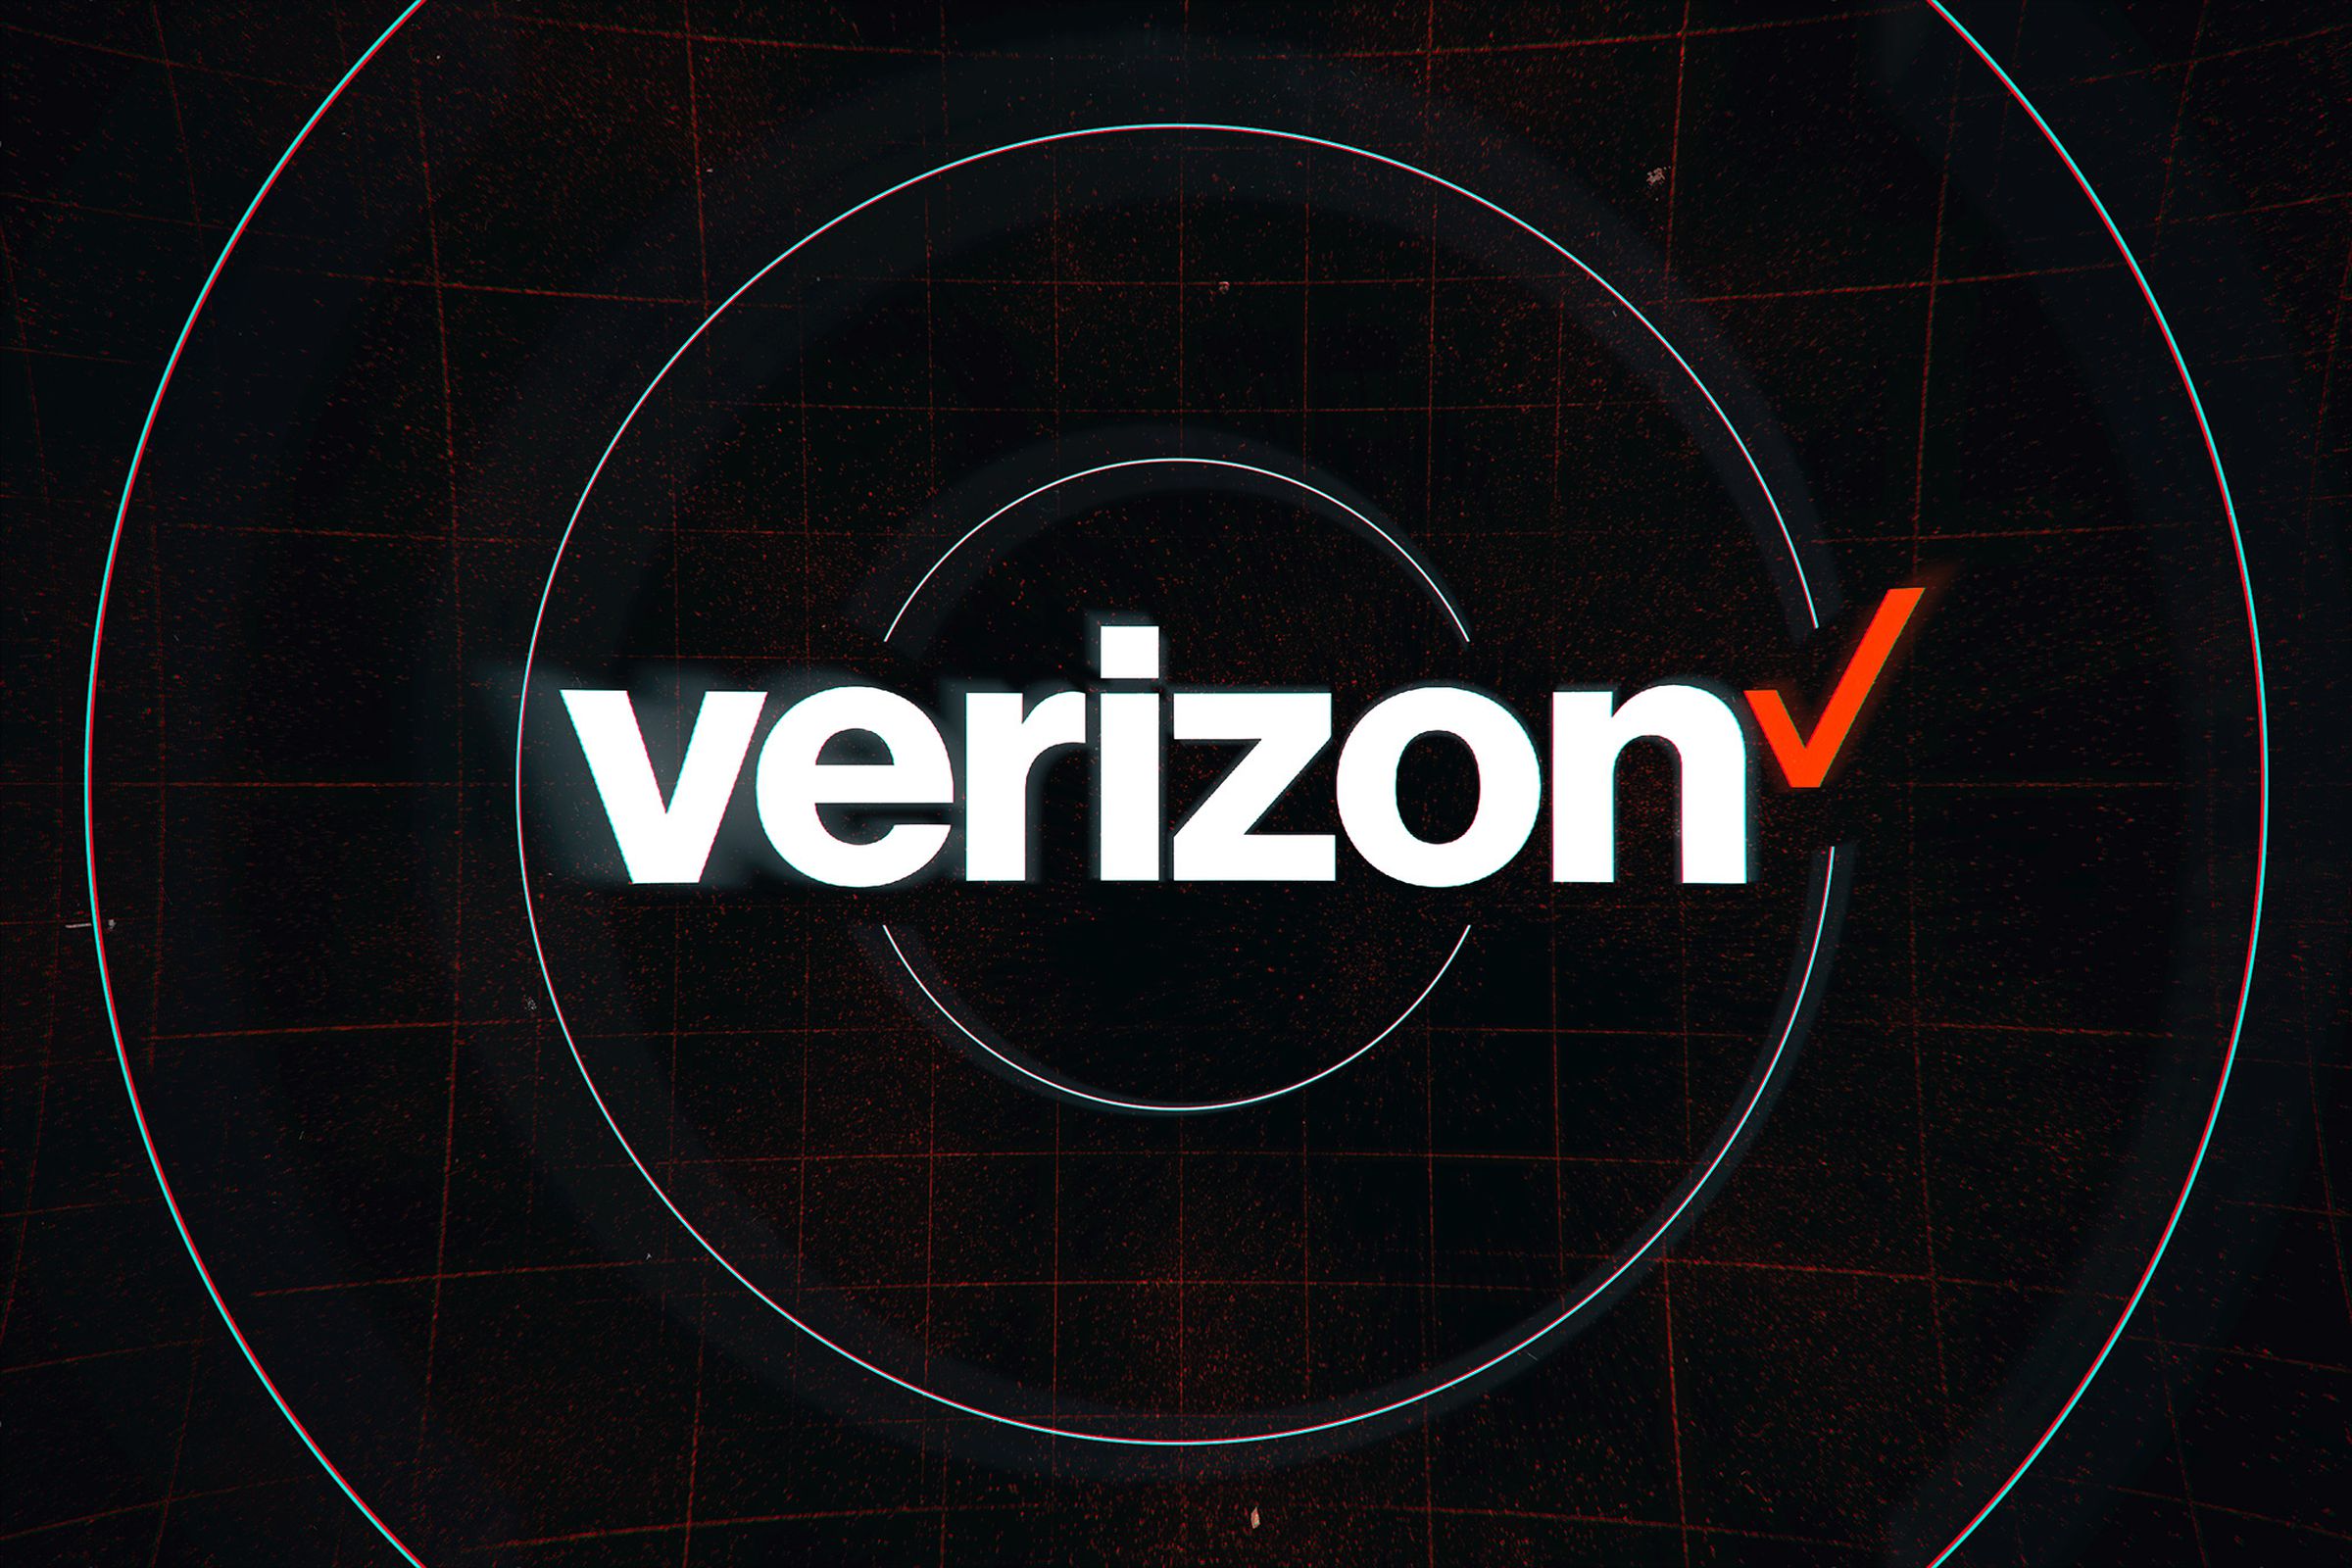 Verizon is the latest carrier to offer a mobile data plan without monthly caps on its fastest network speeds.